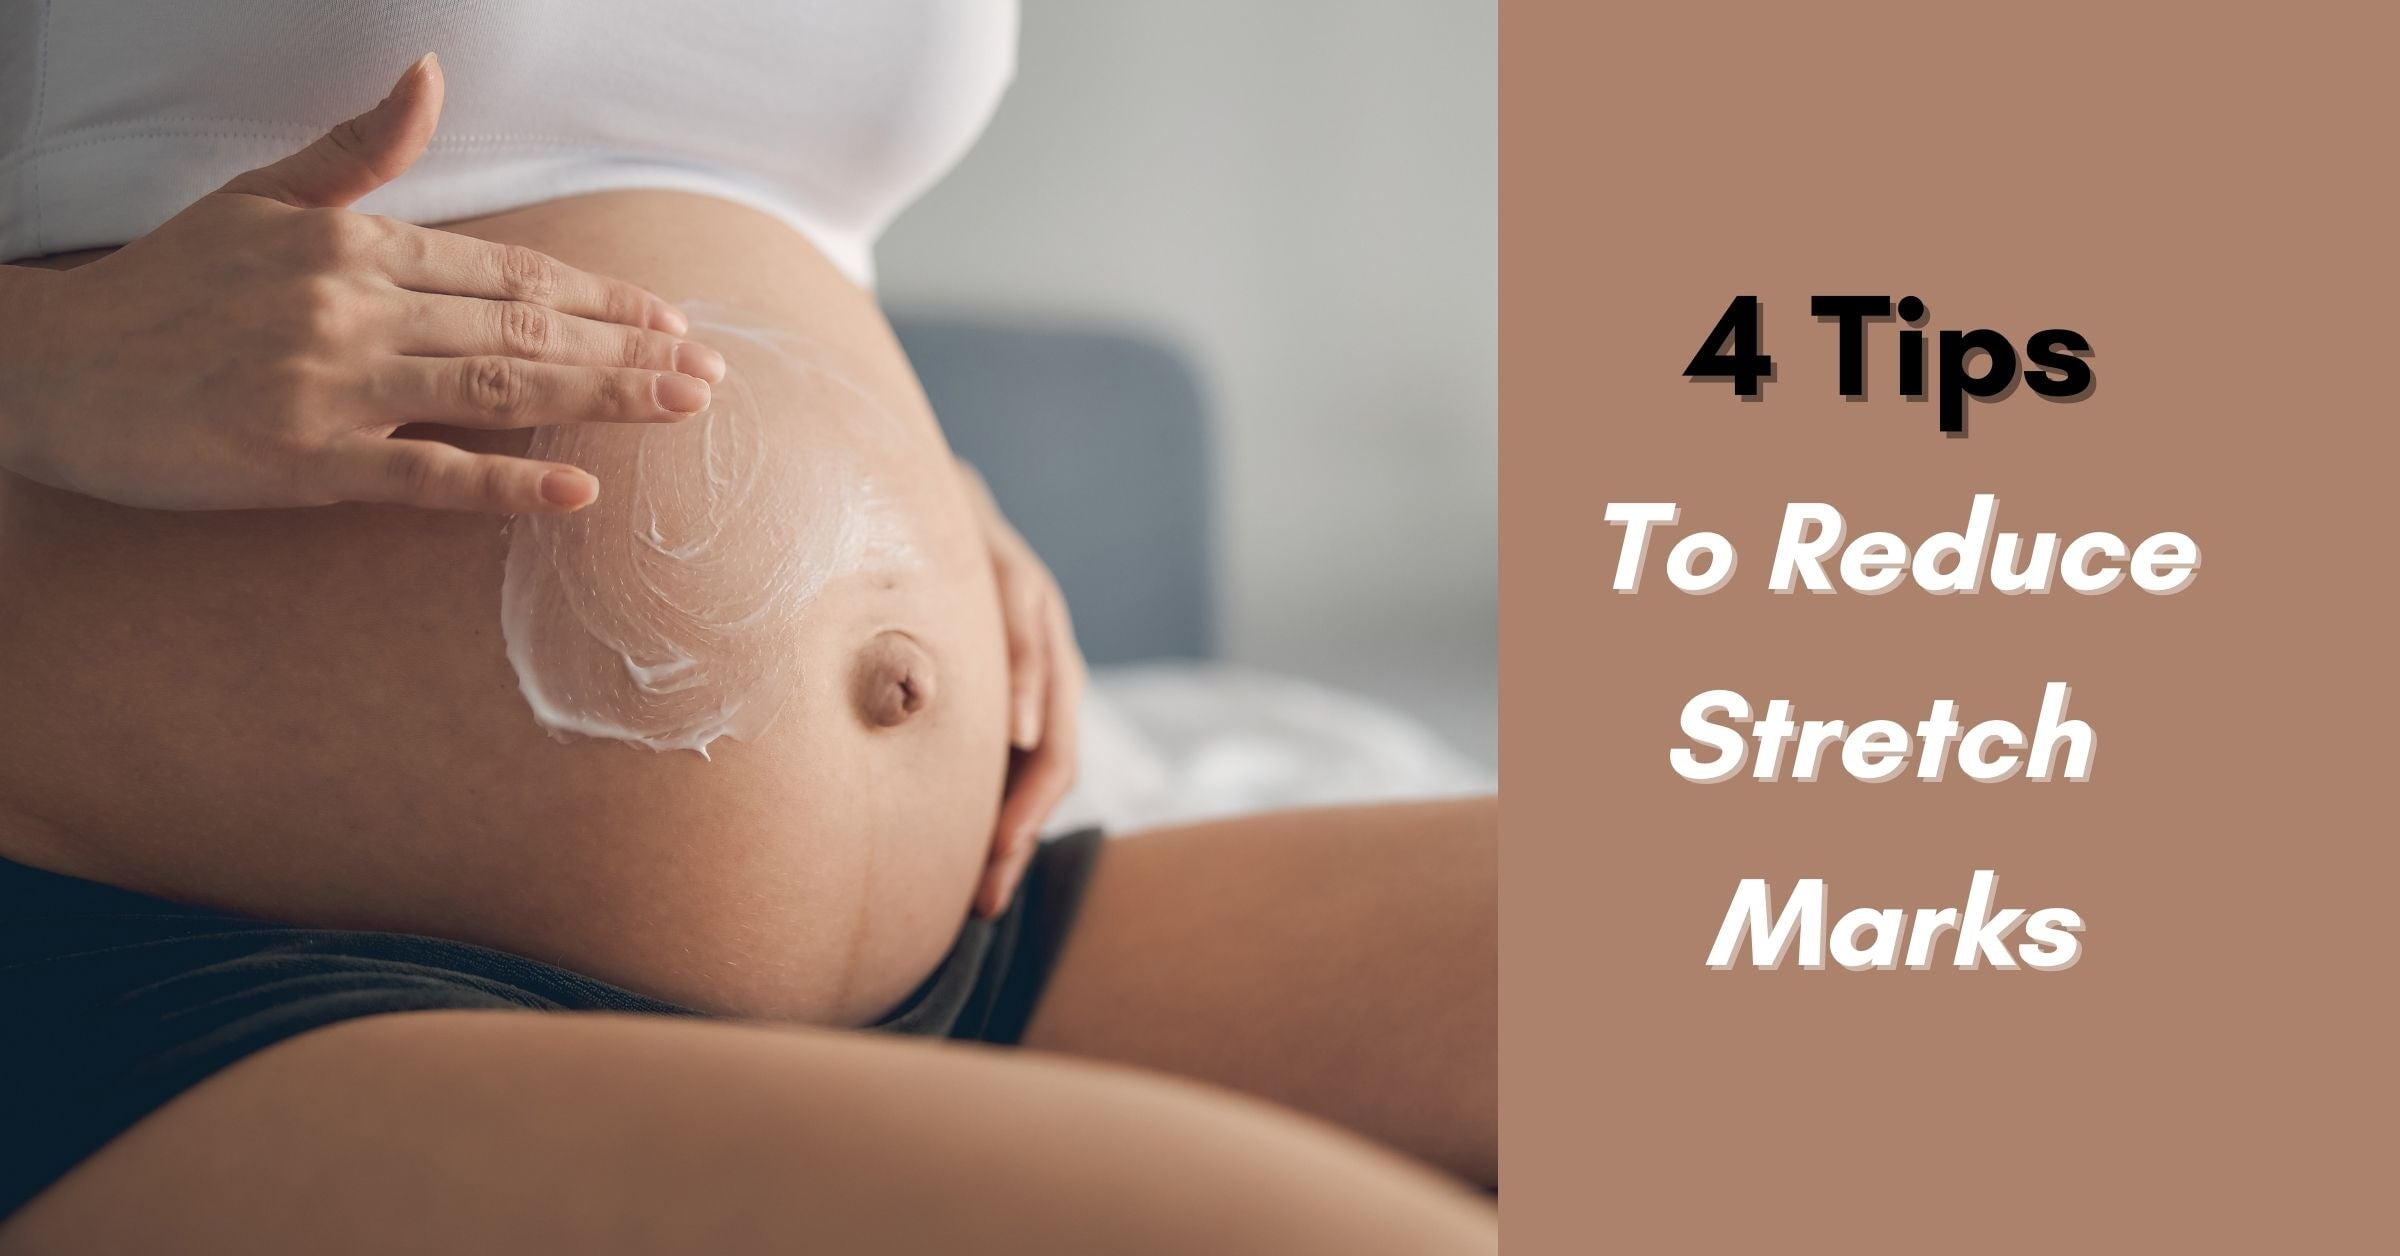 4 Tips To Reduce Stretch Marks